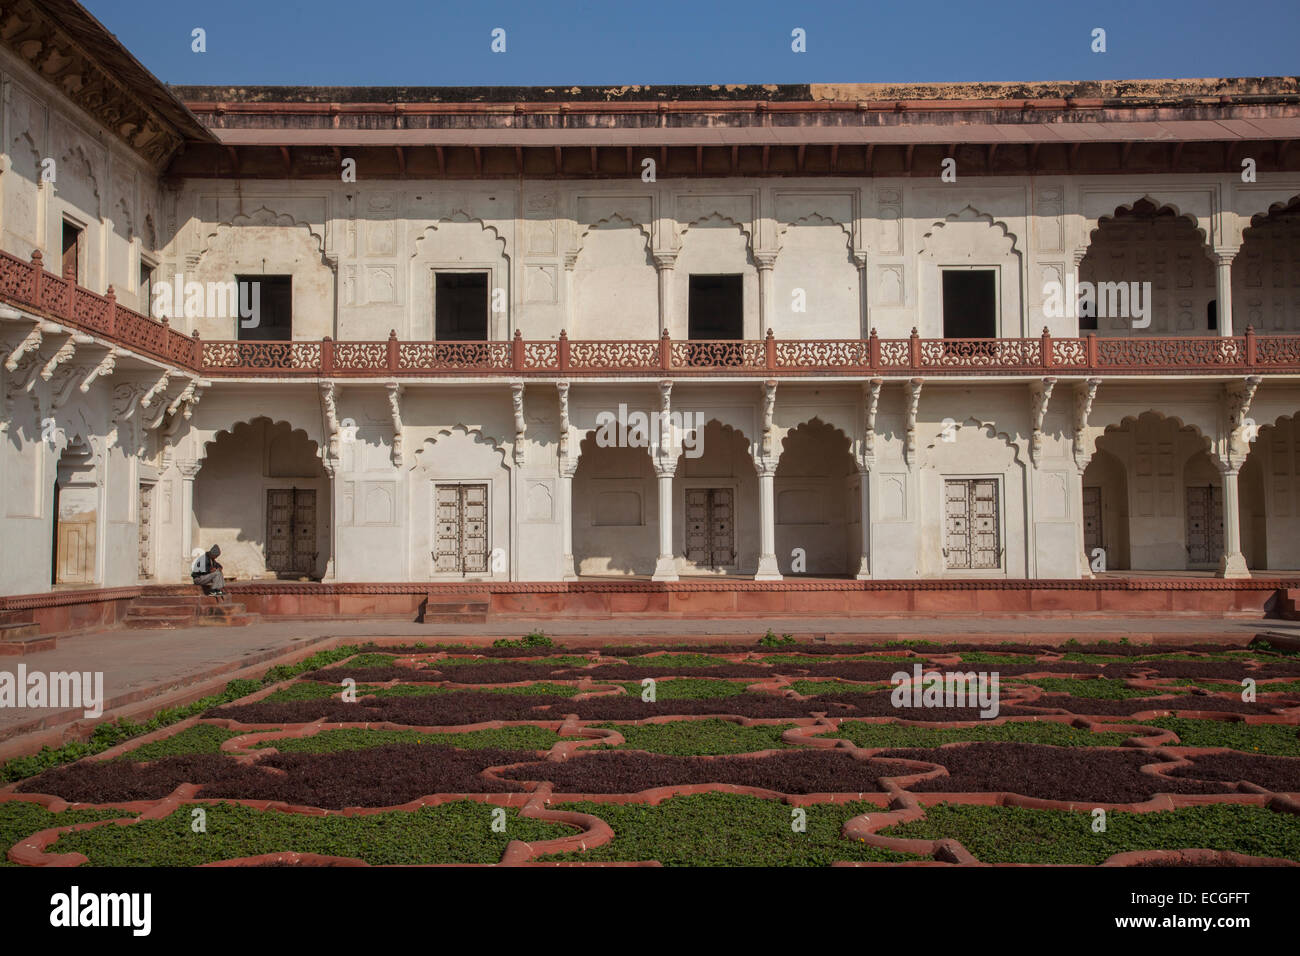 Gardens inside the Agra Fort, India Stock Photo